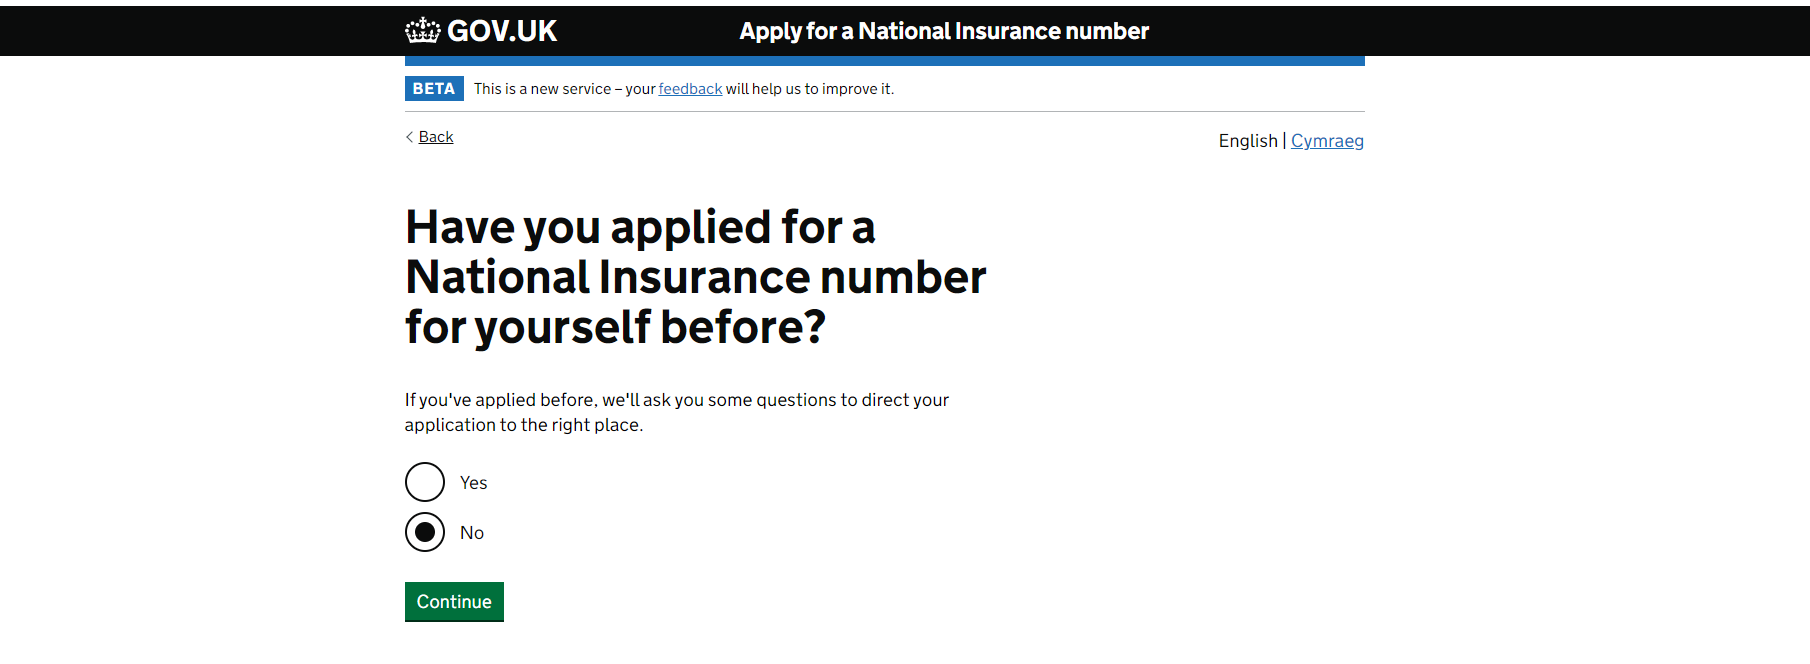 Have you applied for National Insurance before